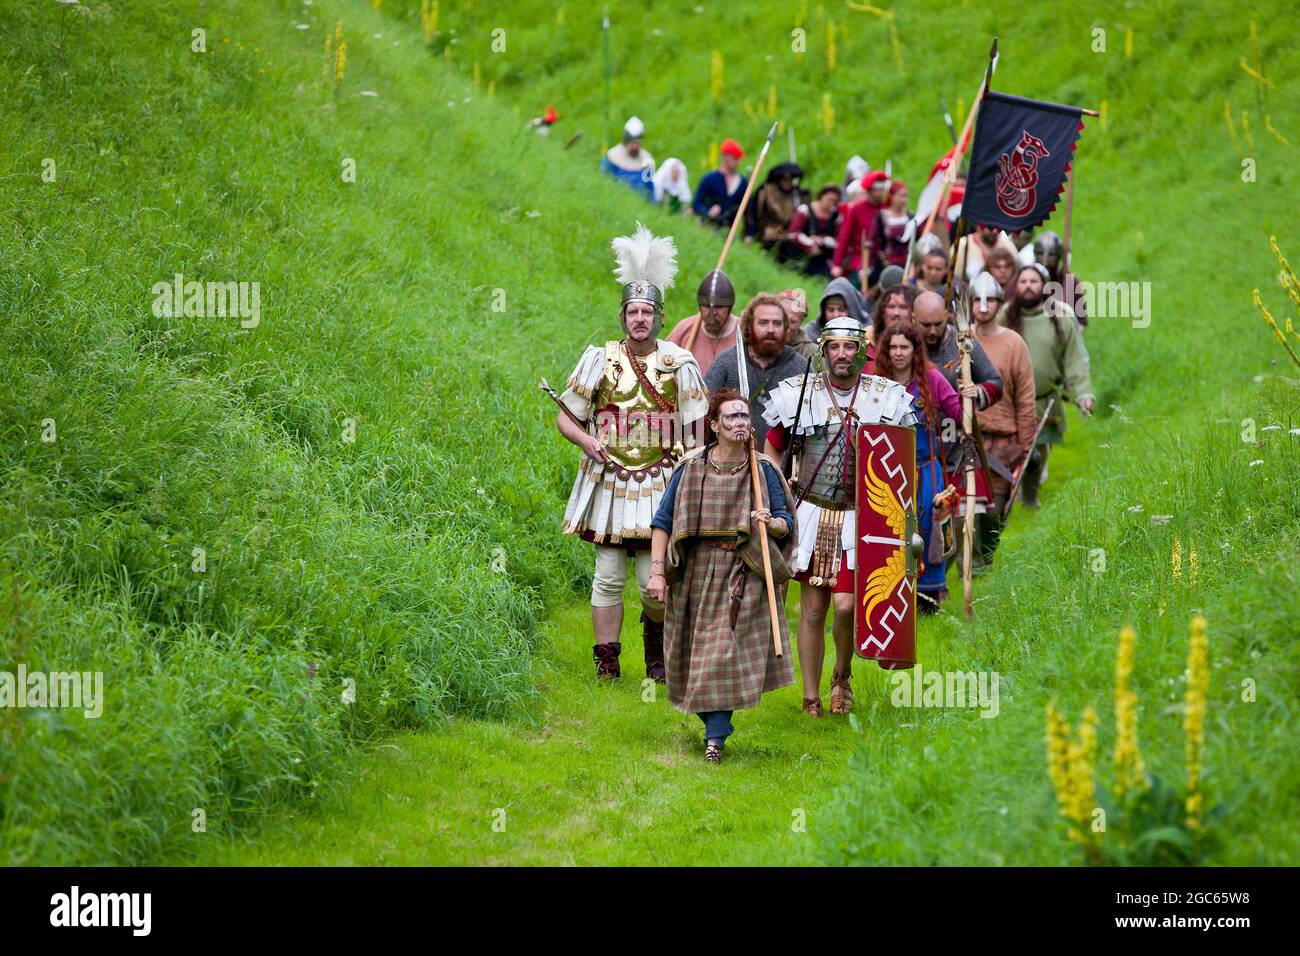 1st August 2021. Norfolk, England. Soldiers Through the Ages event at Castle Rising, the first public event at the 12th Century castle since before the Covid pandemic outbreak.  Led by Queen Boudica, a parade of re-enactors around the castle's moat, representing warriors from Roman Britain through to the two world wars. Stock Photo